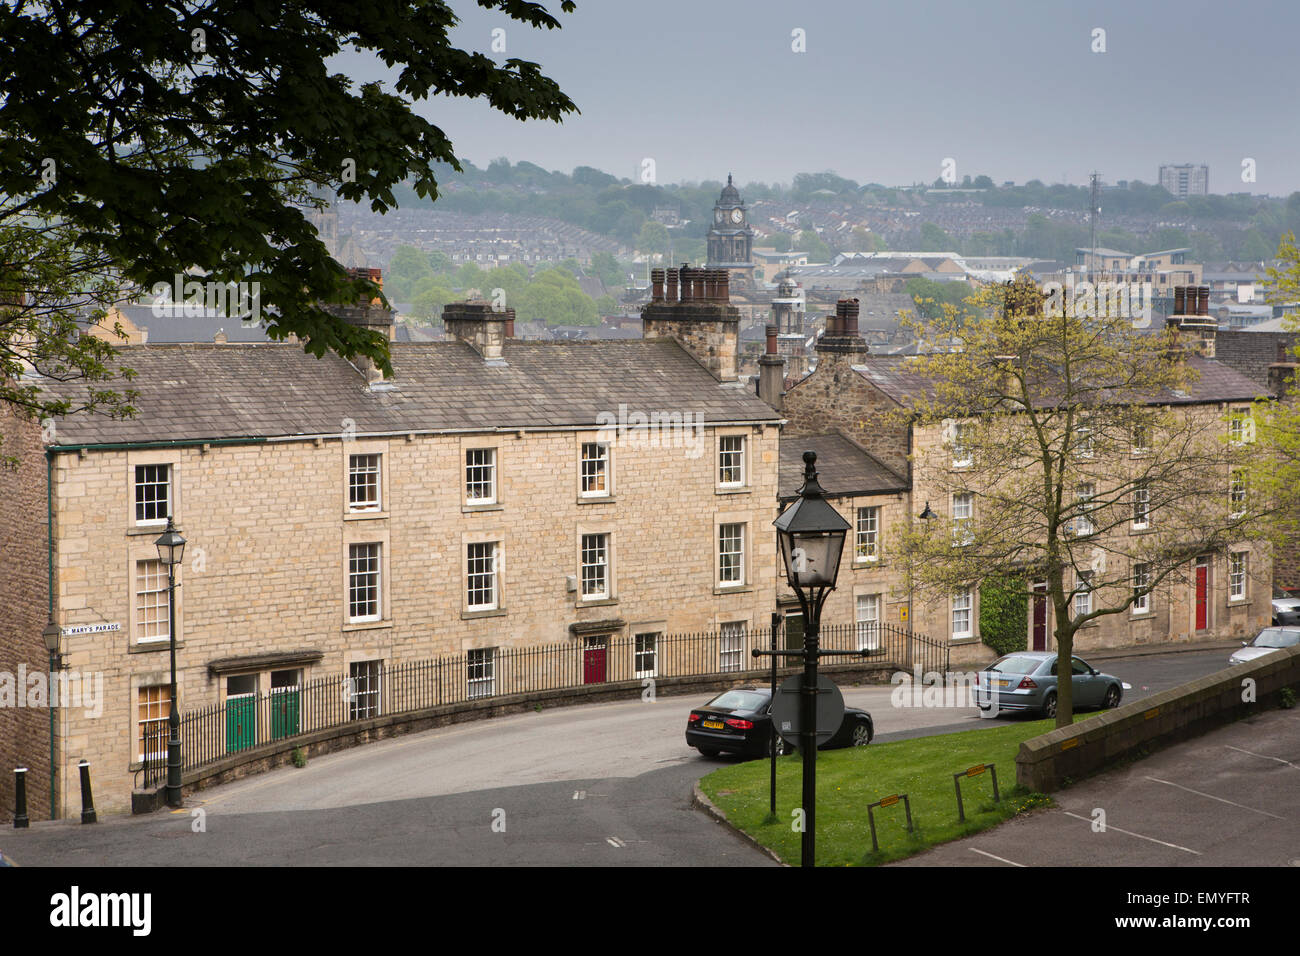 UK, England, Lancashire, Lancaster, elevated view from St Mary’s Parade Stock Photo